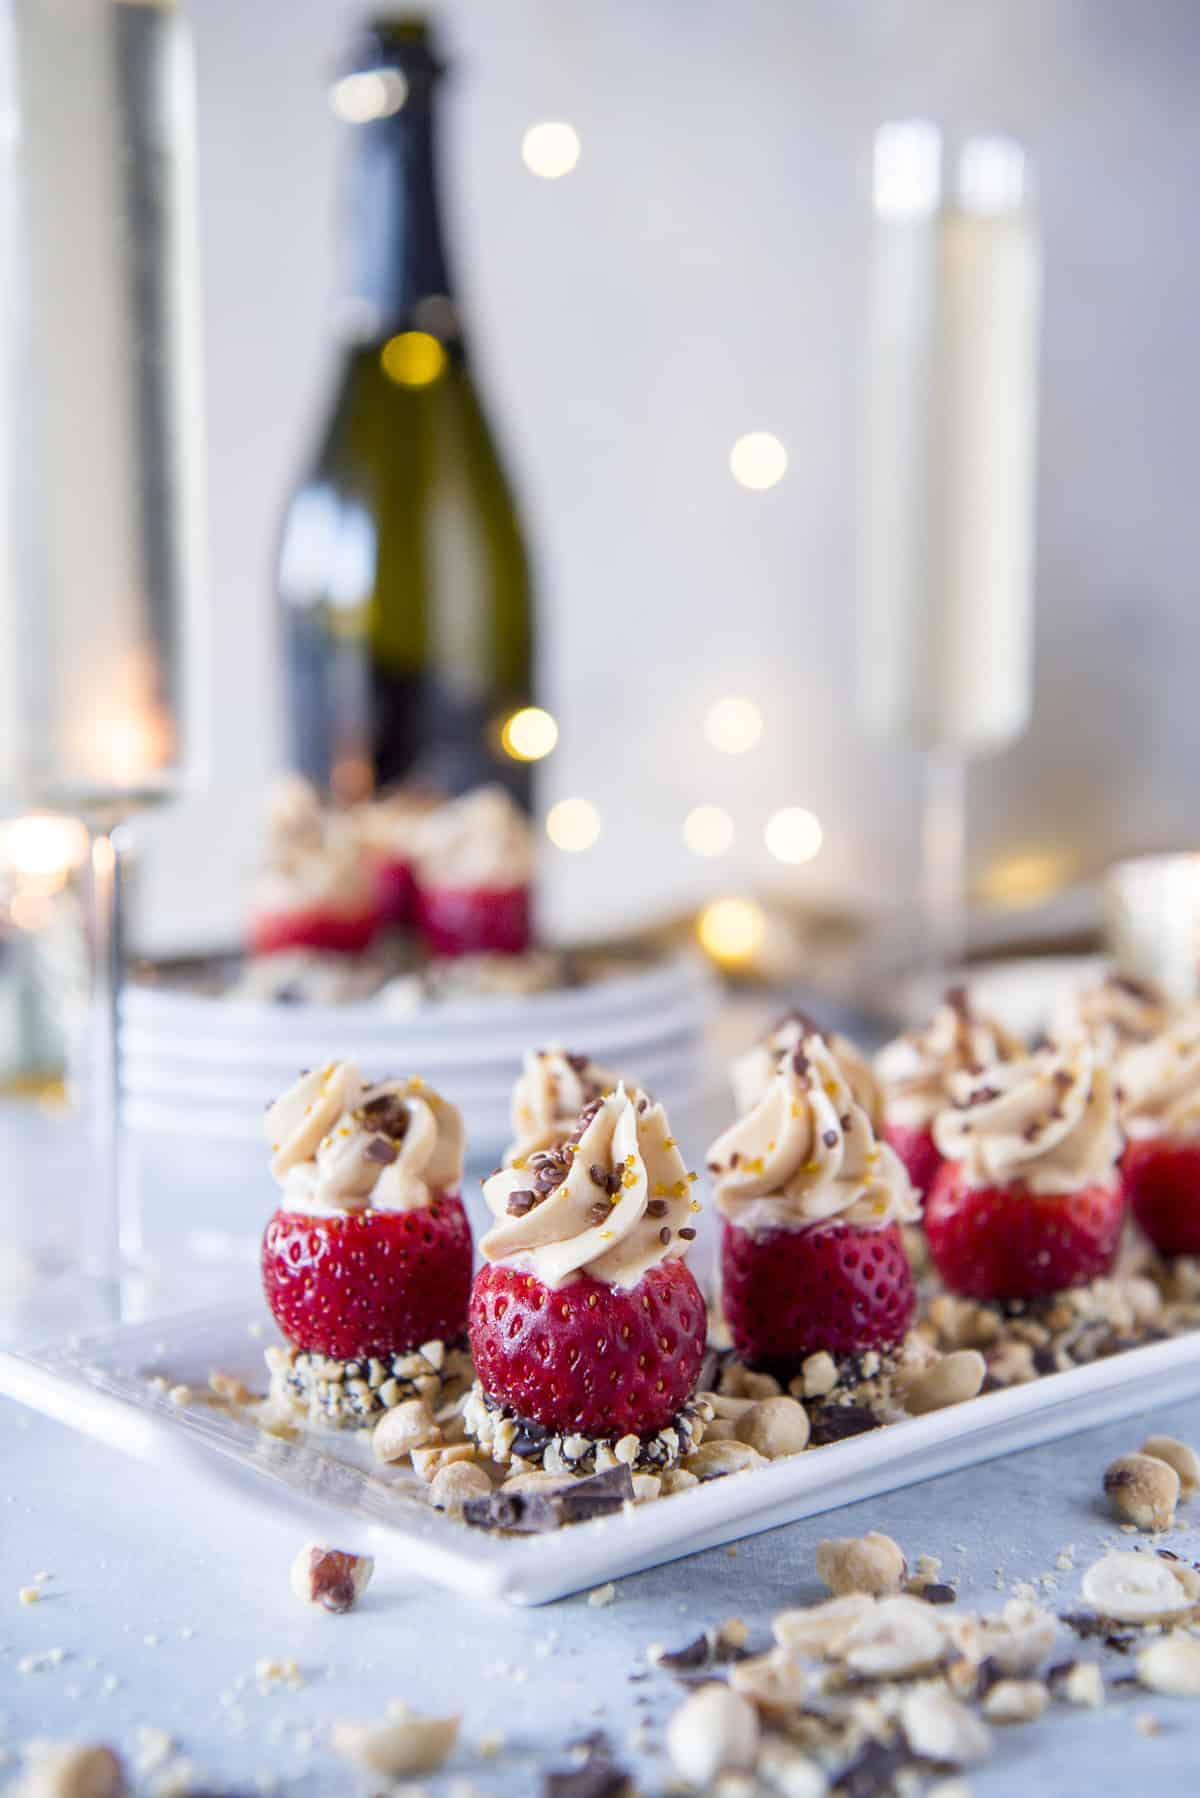 A plate topped with peanut butter cheesecake stuffed strawberries and nuts, with champagne glasses.